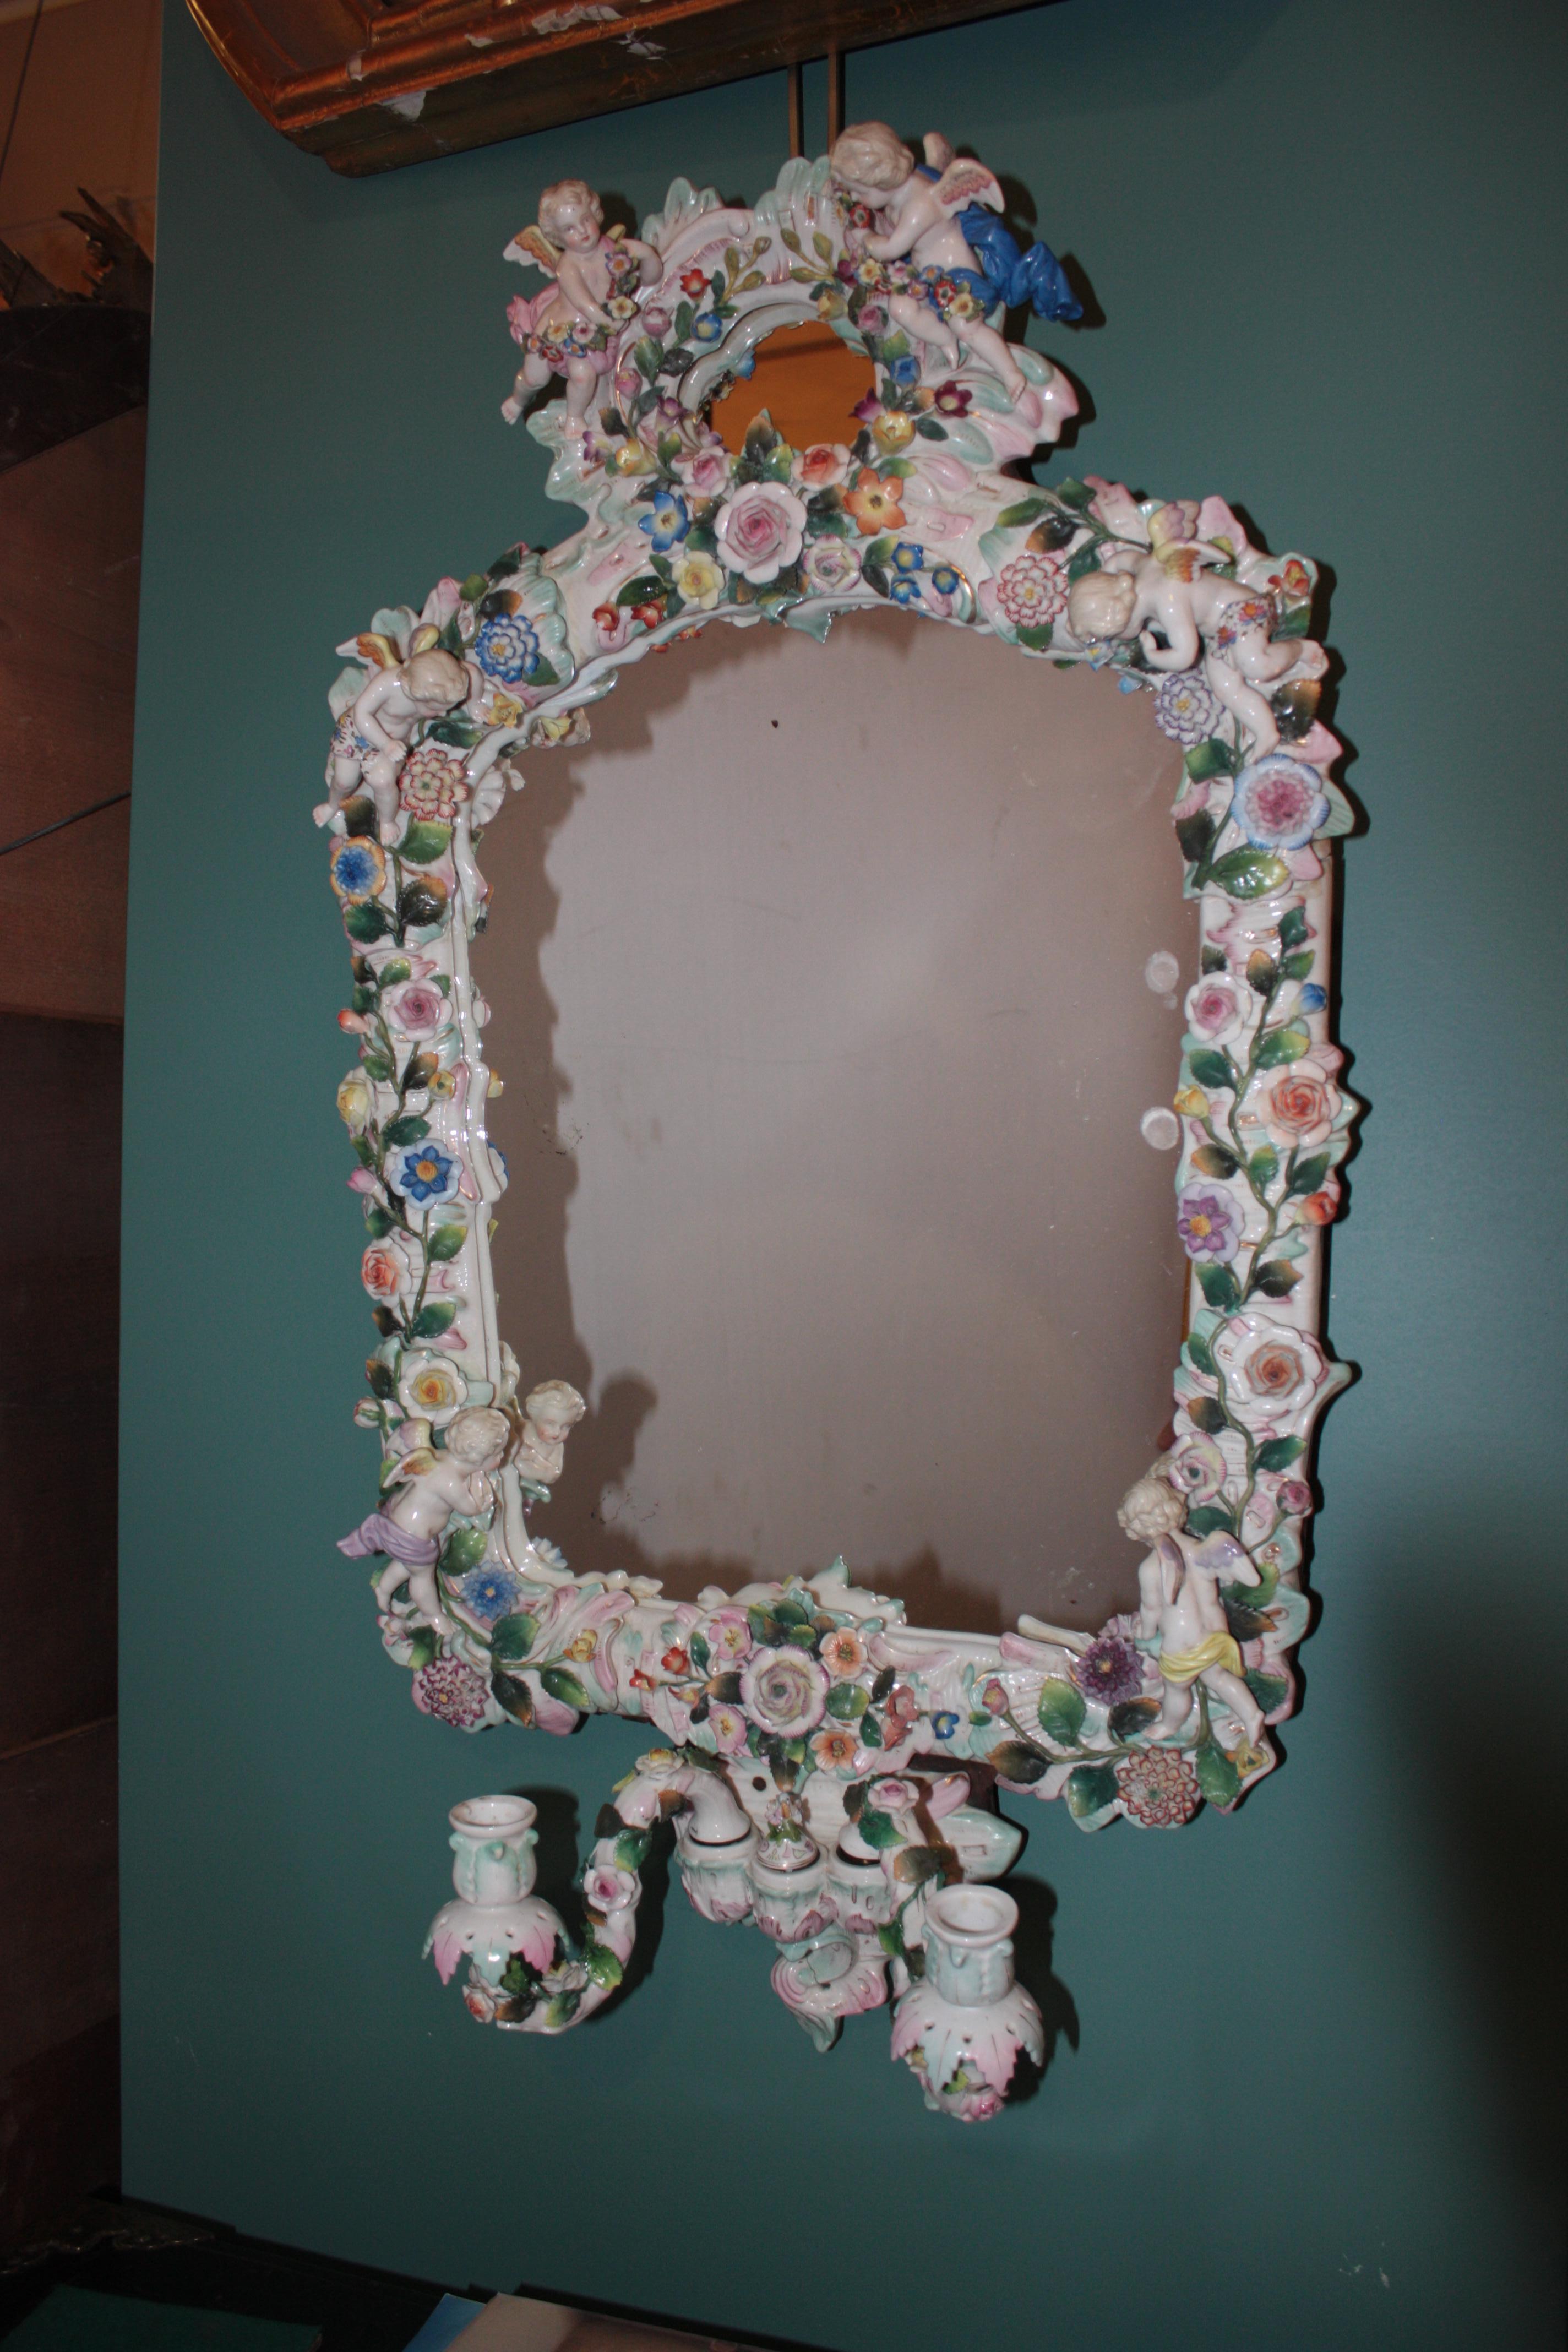 This handsome girandole mirror dates from the late 19th century, the Belle Époque between the Franco- Prussian War and the Great War. Europe then was rich and flourishing. This mirror proclaims the exuberance and self-confidence of that era. It is a